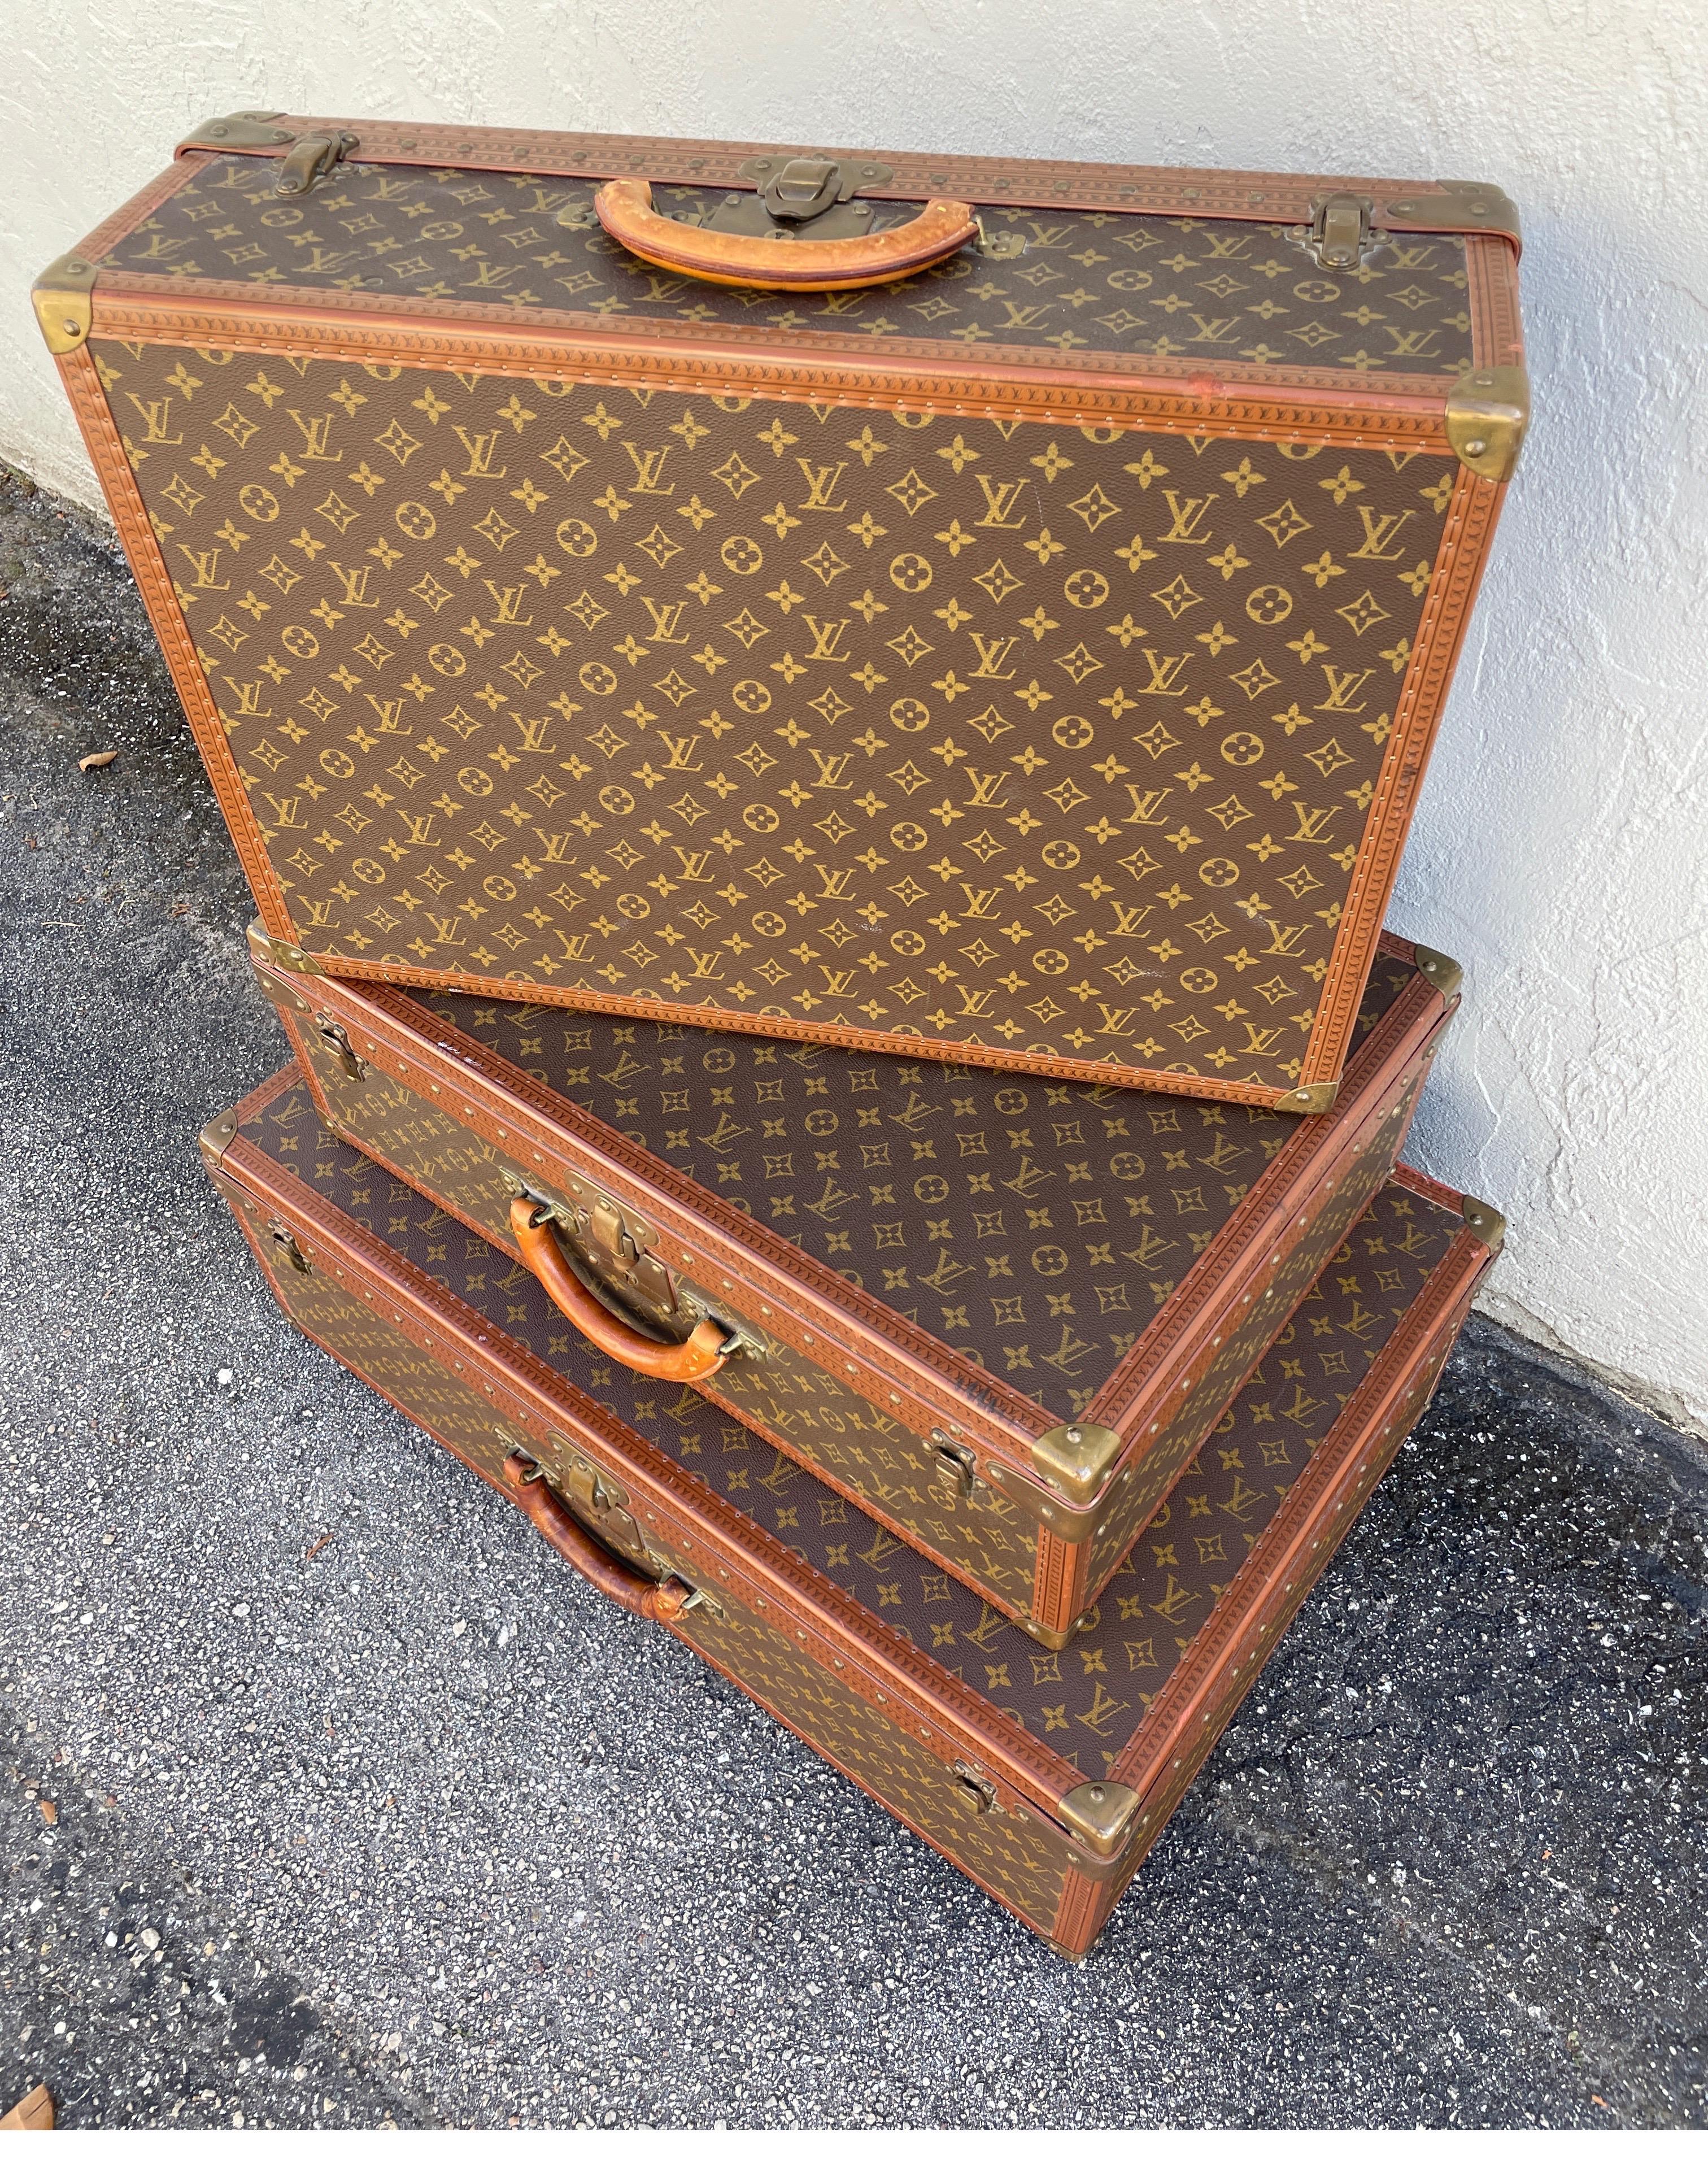 Wonderful set of three pieces of hard sided Louis Vuitton luggage. This set was purchases brand new in Paris & has been rarely used. Hence the almost like new condition.
The largest piece is 31.50